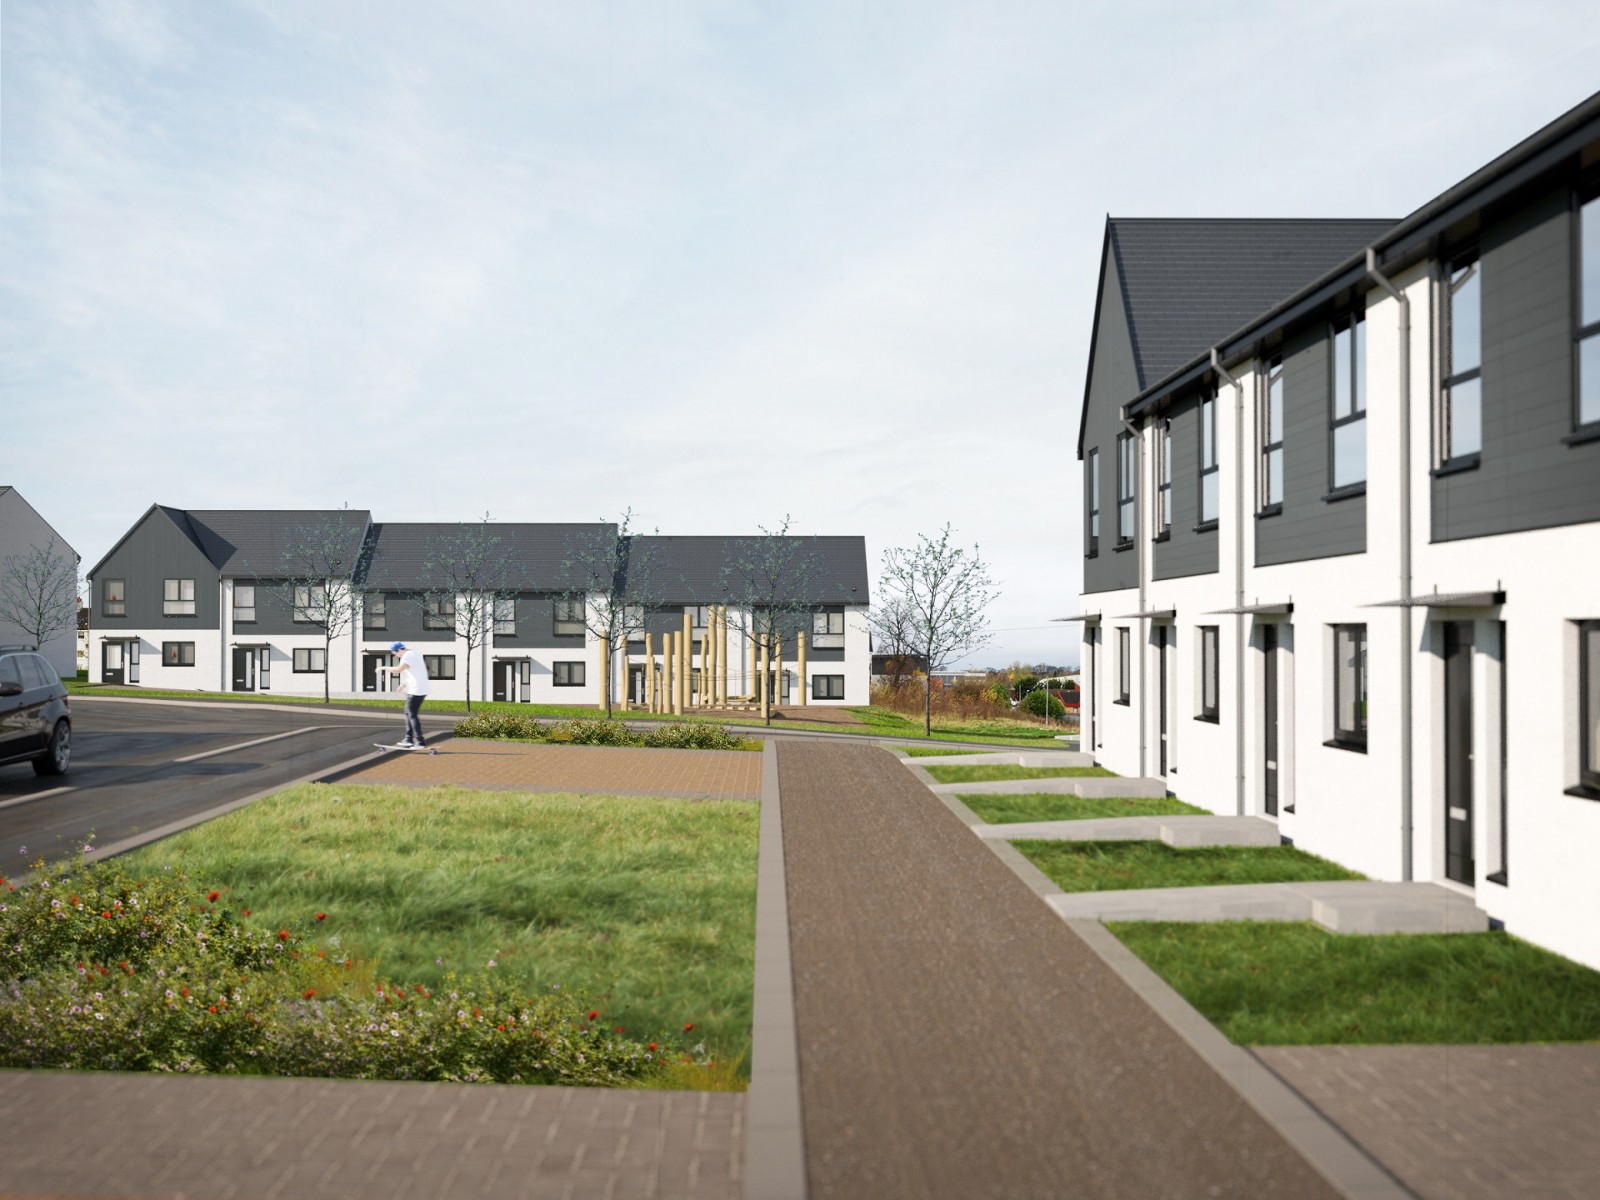 Easterhouse site to be brought back to life with new homes plan